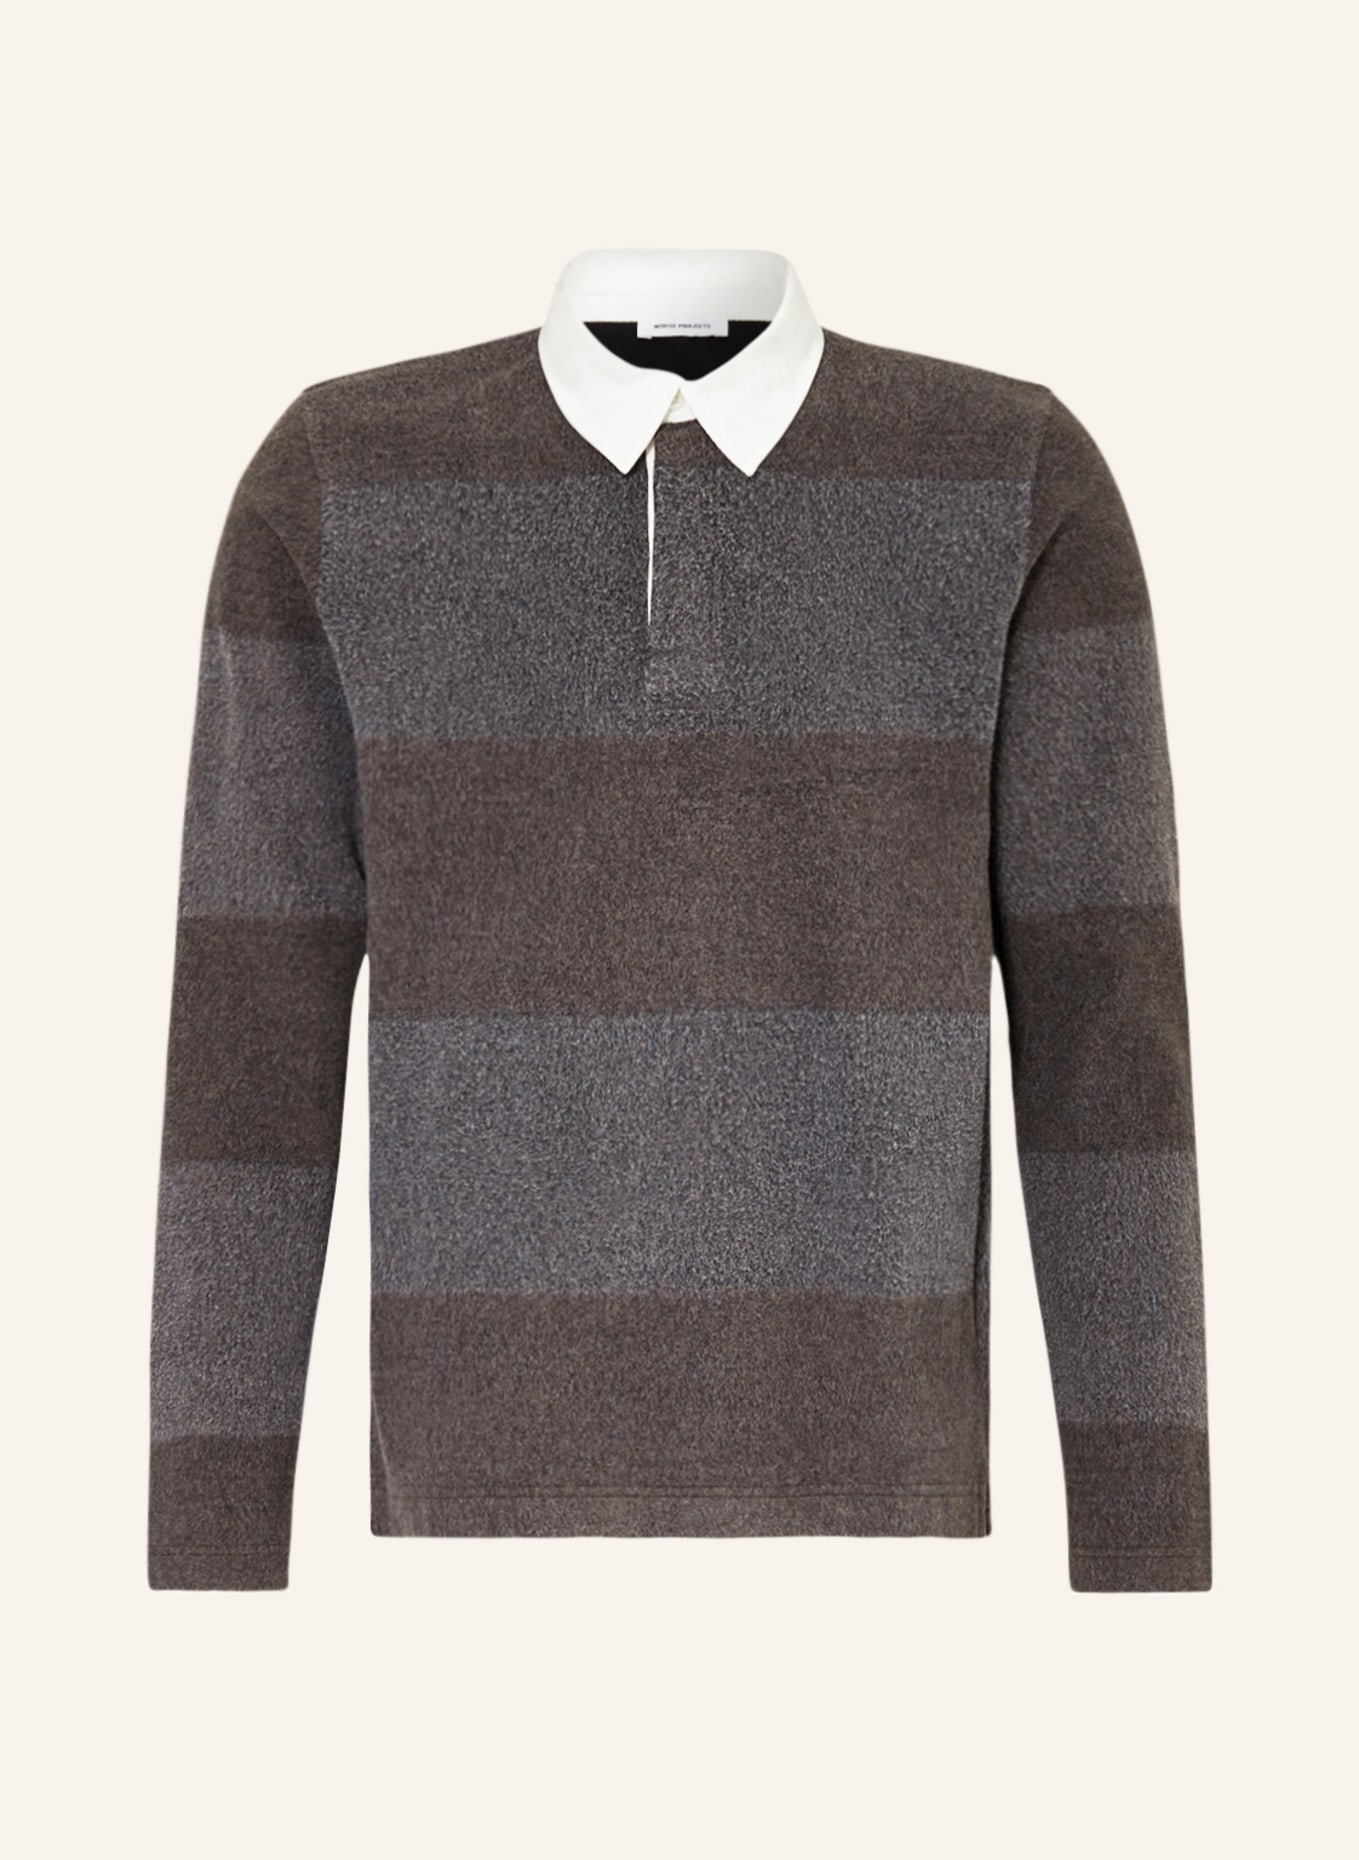 NORSE PROJECTS Rugbyshirt RUBEN, Farbe: TAUPE (Bild 1)